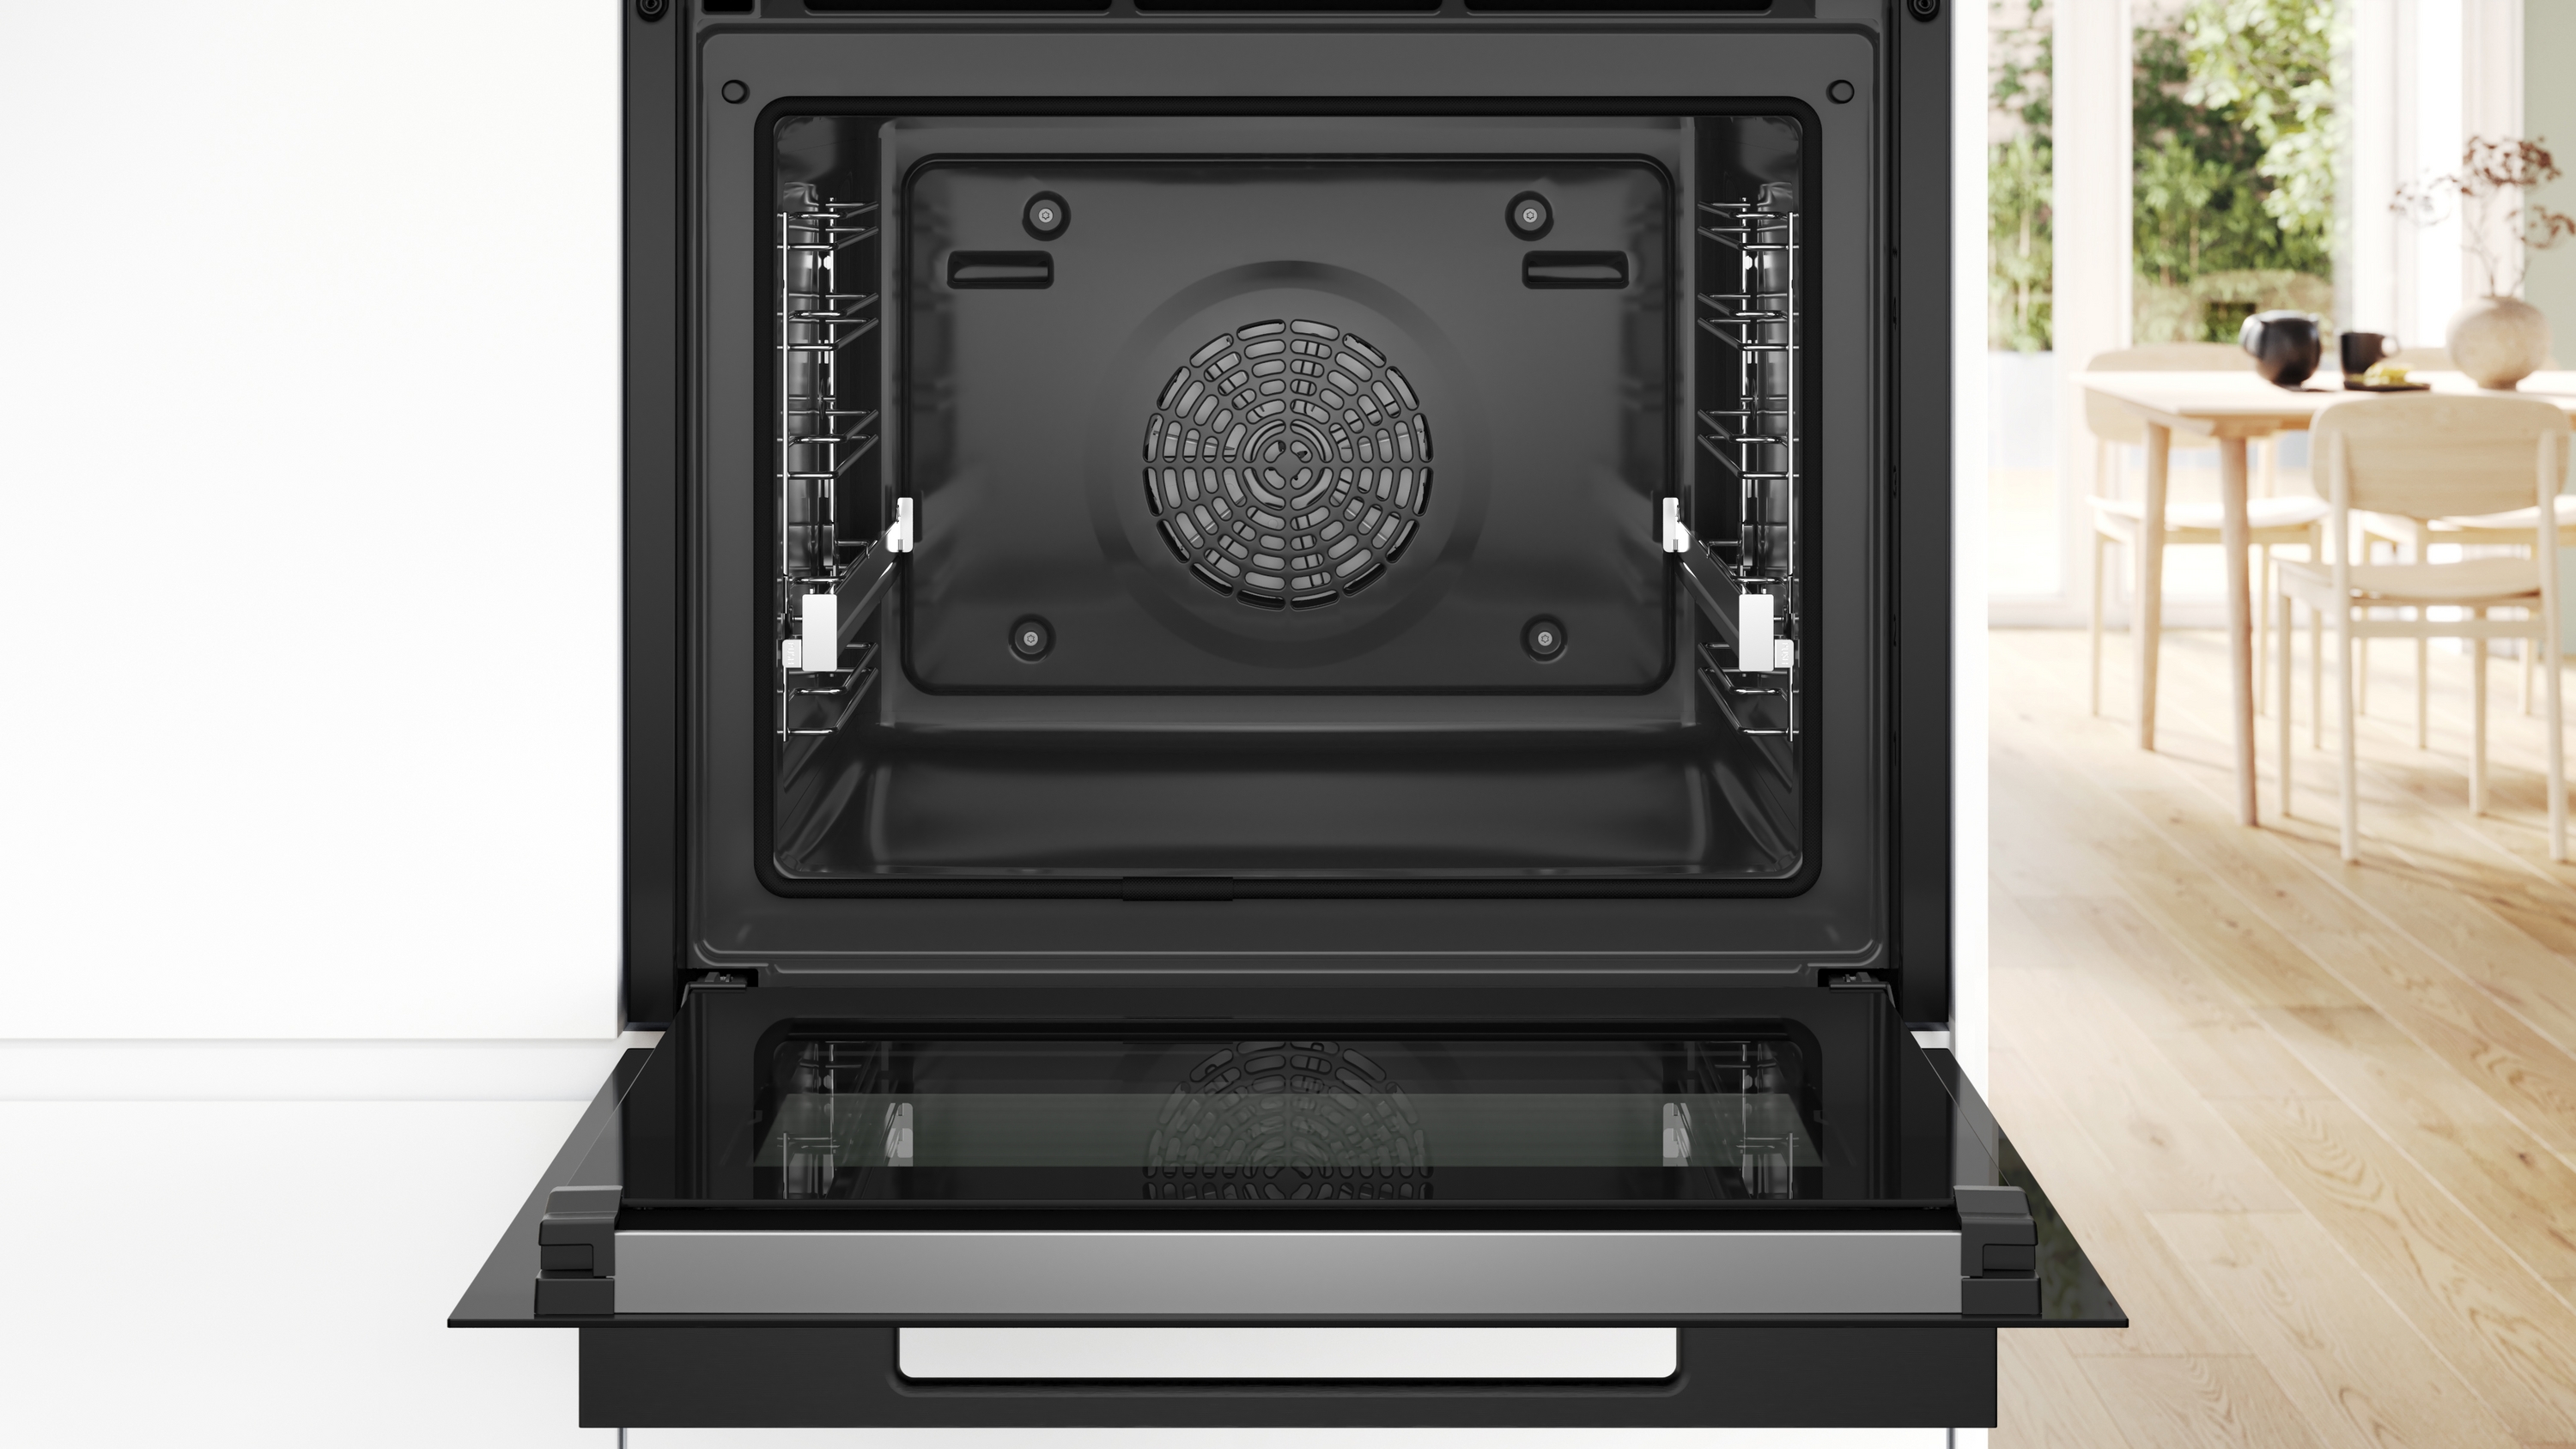 Series 8, Built-in oven with added steam function, 60 x 60 cm, Black, HRG976NB1